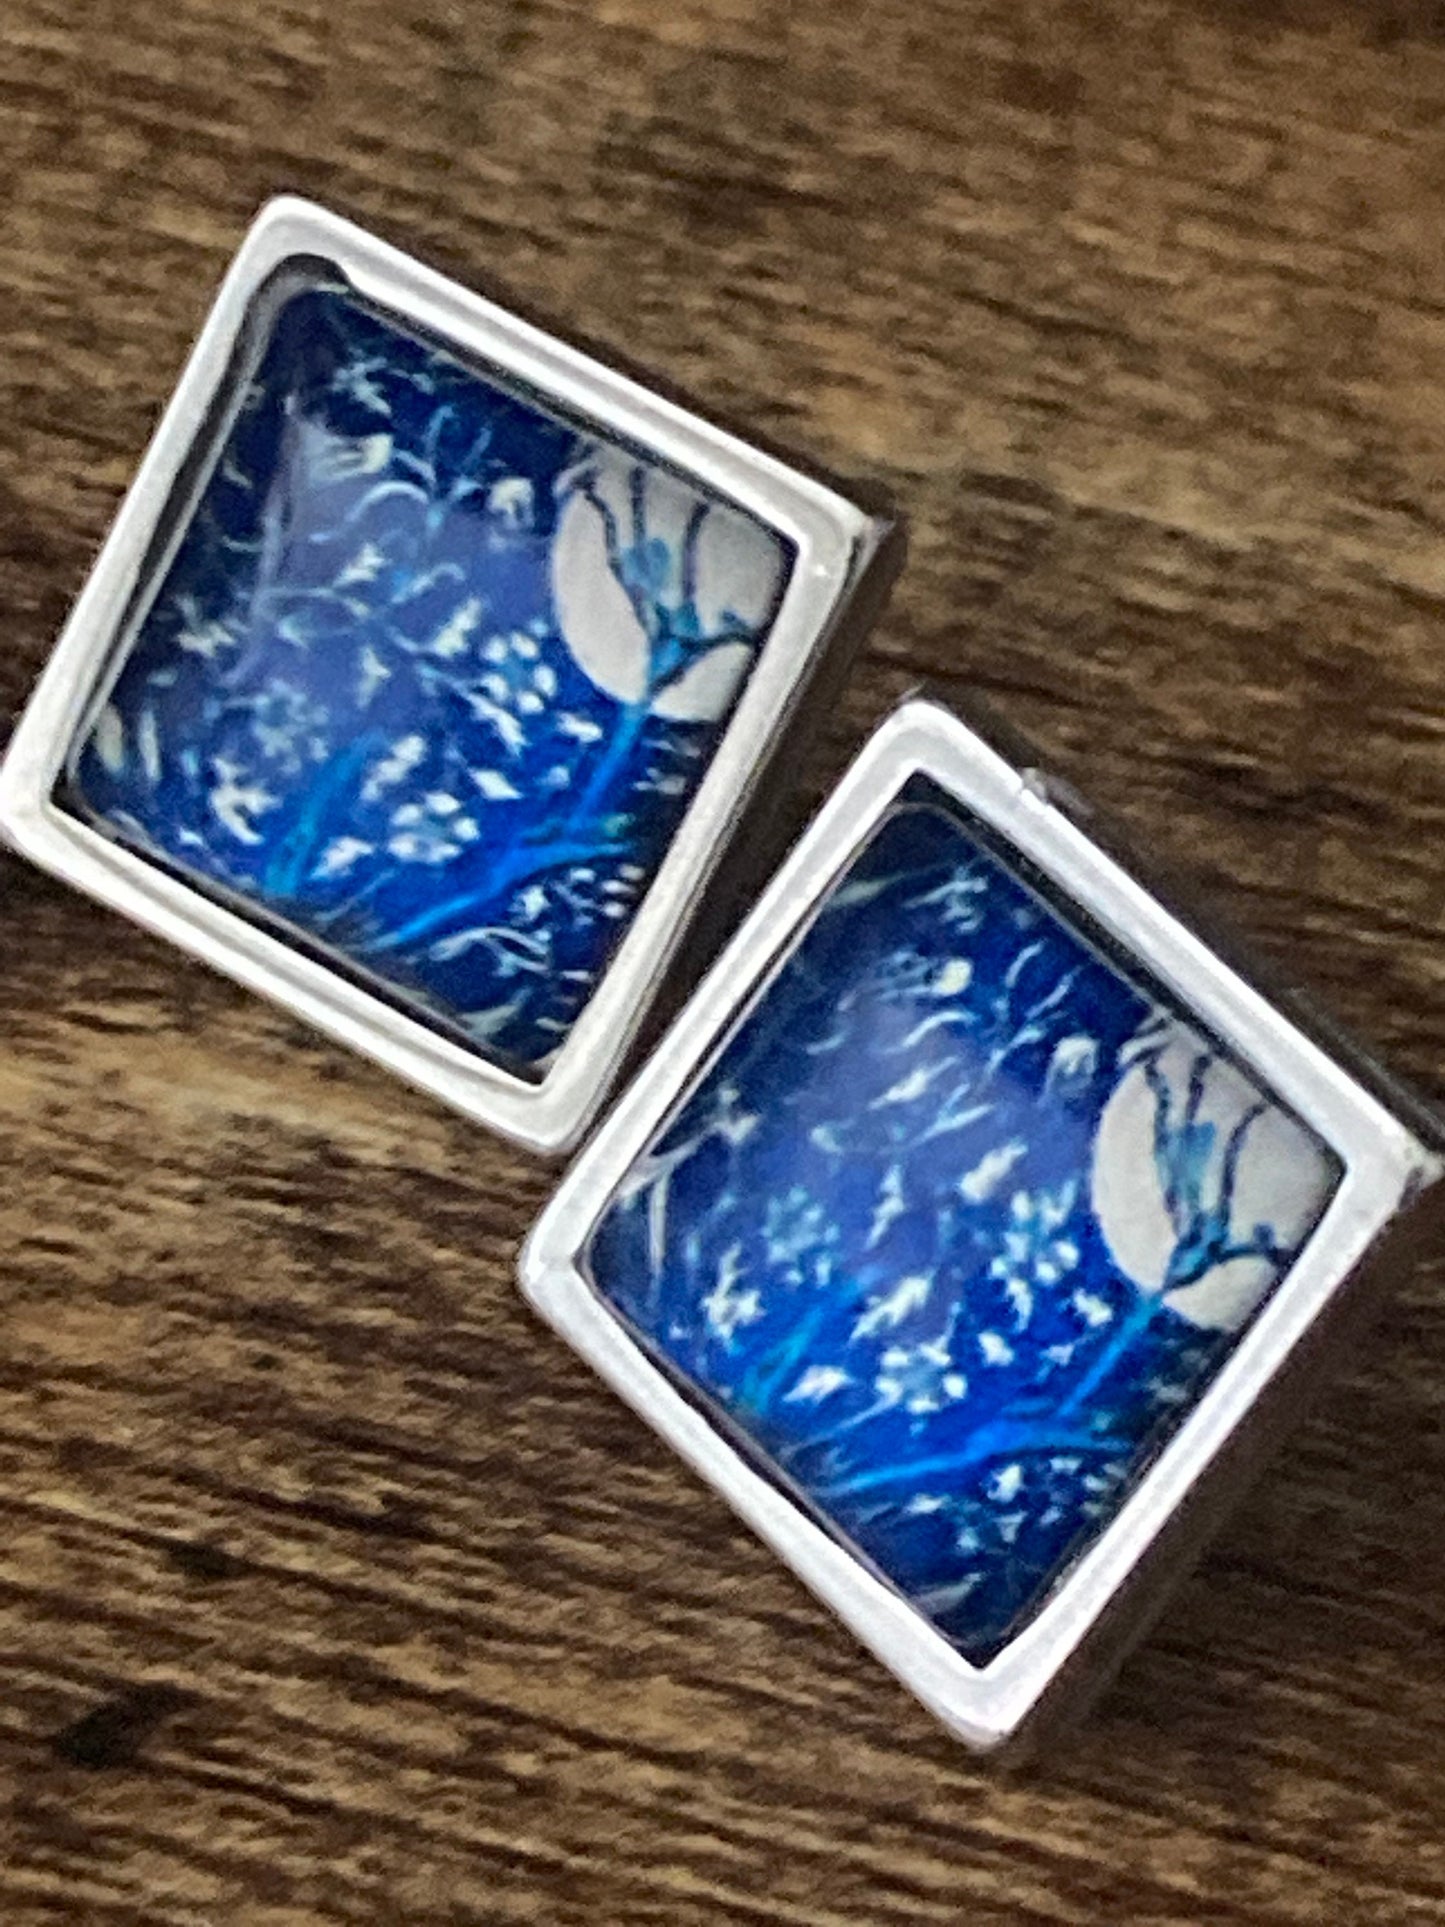 stainless steel 1.5cm square William Morris tulip print glass stud cabochon earrings